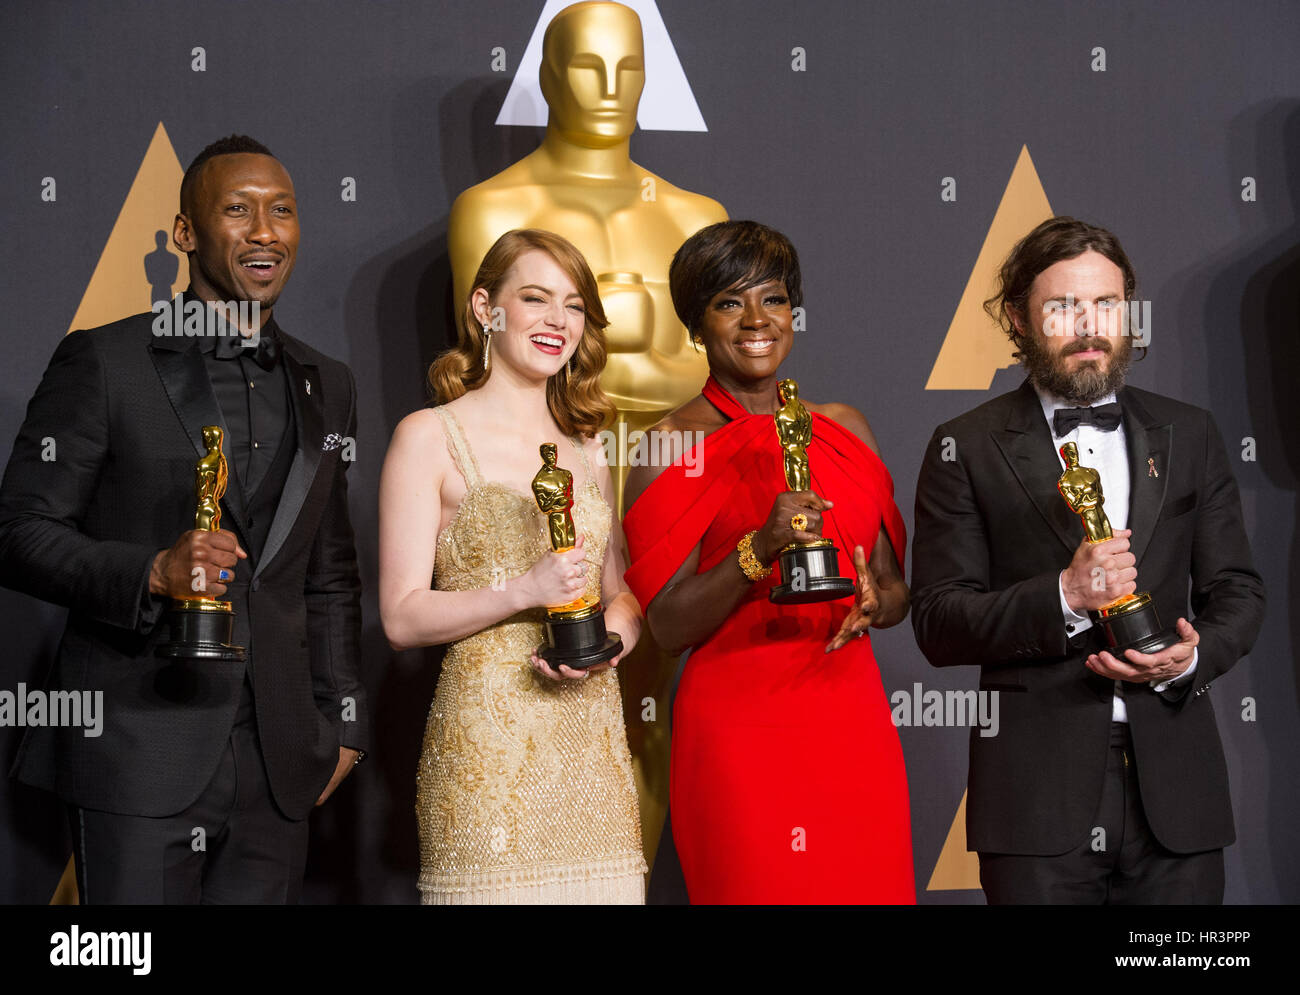 Los Angeles, USA. 26th Feb, 2017. (L-R) Actor Mahershala Ali, winner of Best Supporting Actor for 'Moonlight,' Emma Stone, winner of Best Actress for 'La La Land,' Viola Davis, winner of Best Supporting Actress for 'Fences,' and Casey Affleck, winner of Best Actor for 'Manchester by the Sea' pose for group photos at press room of the 89th Academy Awards at the Dolby Theater in Los Angeles, the United States, on Feb. 26, 2017. Credit: Yang Lei/Xinhua/Alamy Live News Stock Photo